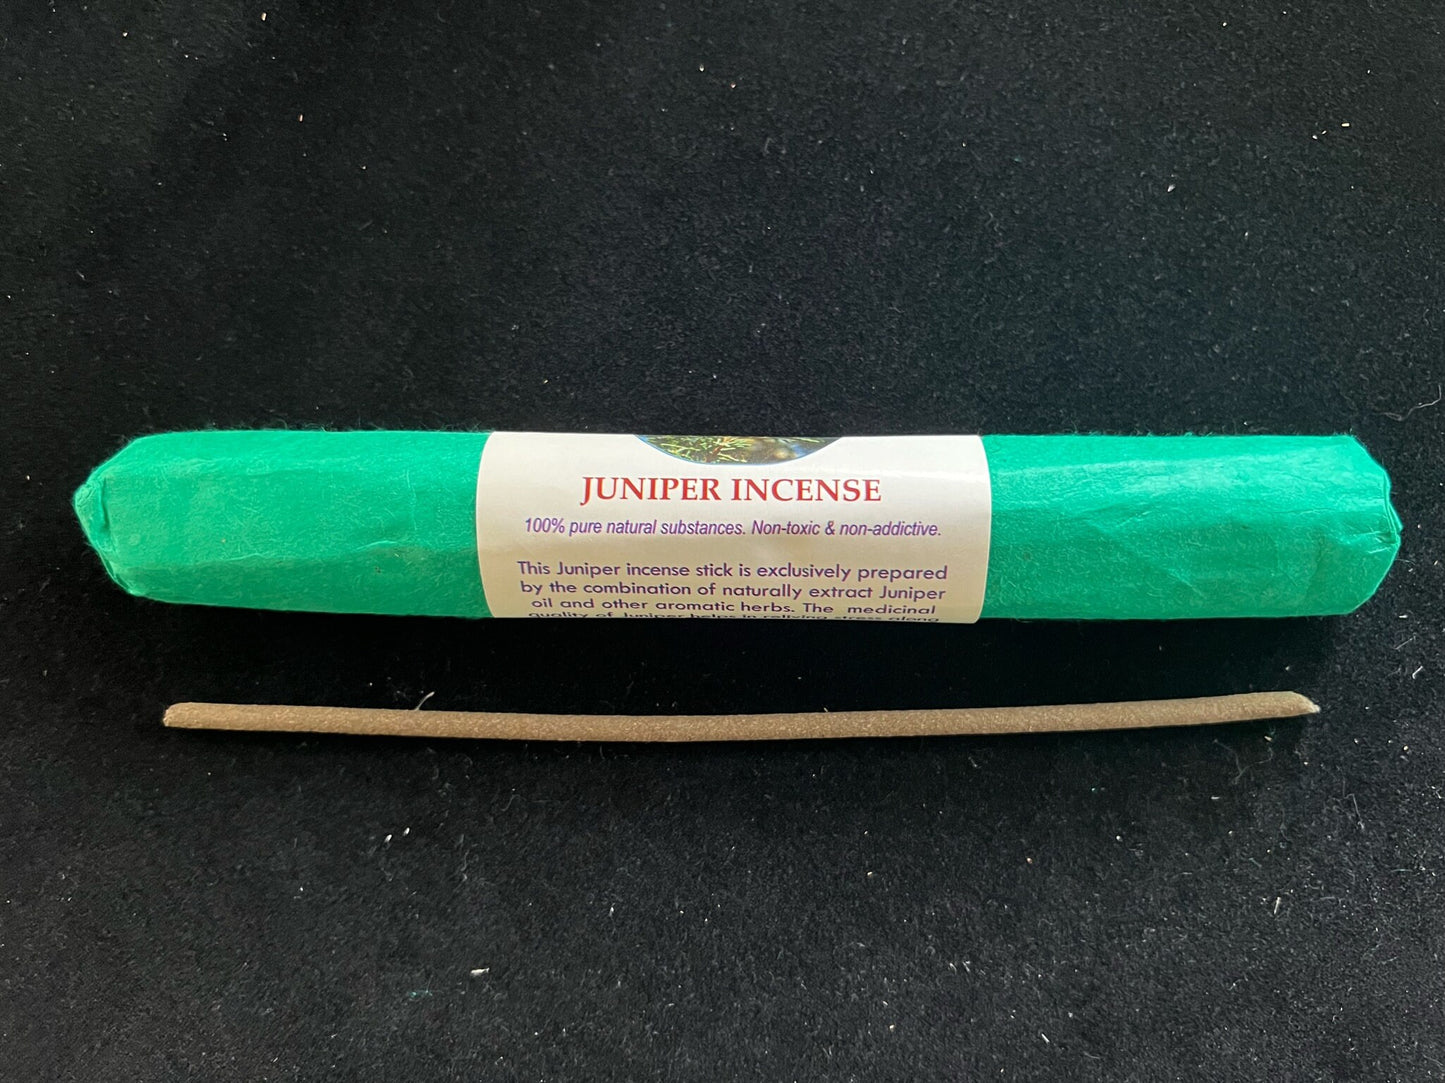 Roll of Himalayan Arts Juniper Incense on a table. The incense is wrapped in green paper.  A single stick is also displayed to show a light green tinted incense.